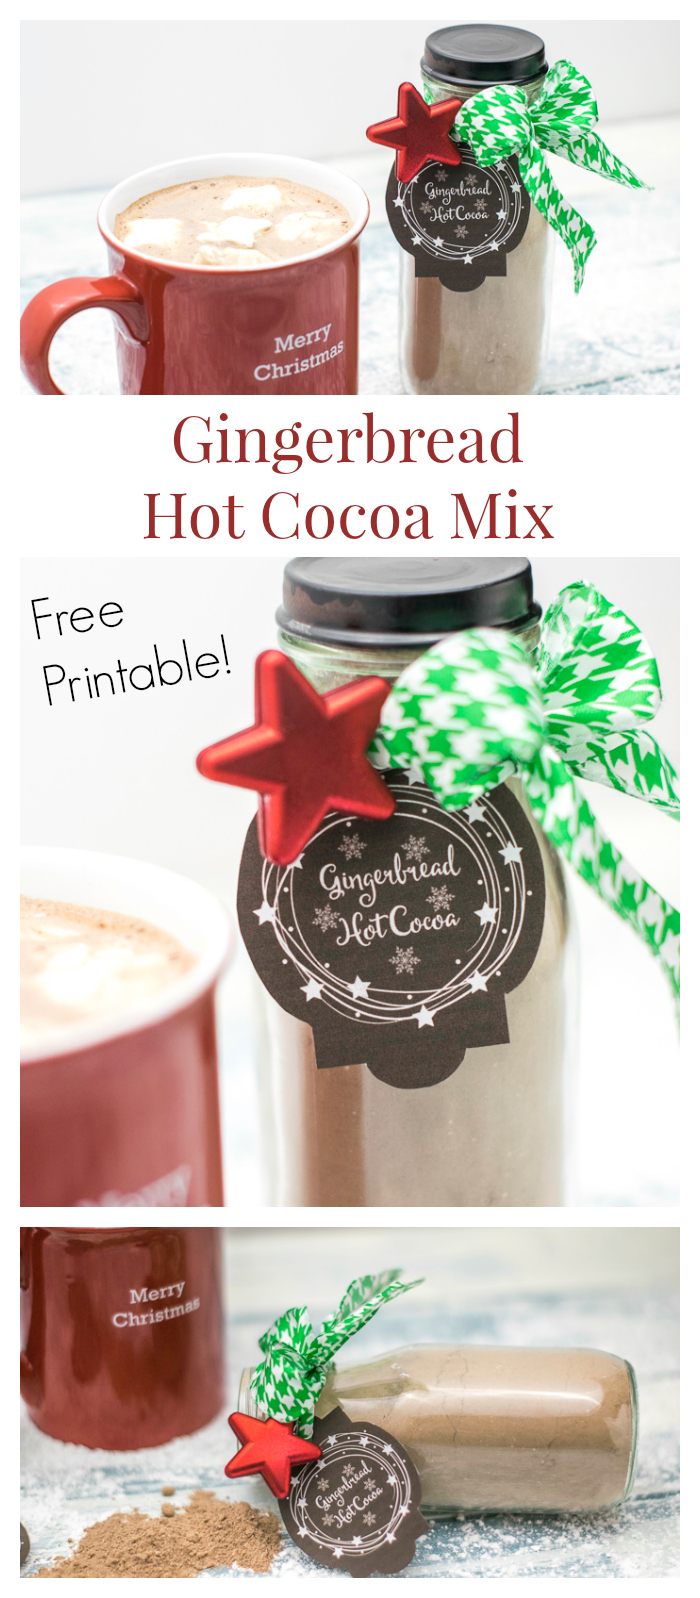 A perfect gift for a neighbor! Gingerbread hot cocoa mix. Click to get the recipe AND the free printable tags. Great for those cold winter nights. Let your neighbors and friends know you are thinking of them this holiday season! #holidaygifts #hotcocoa #gourmethotchocolate #hotchocolate #MHTAW via @mrsmajorhoff